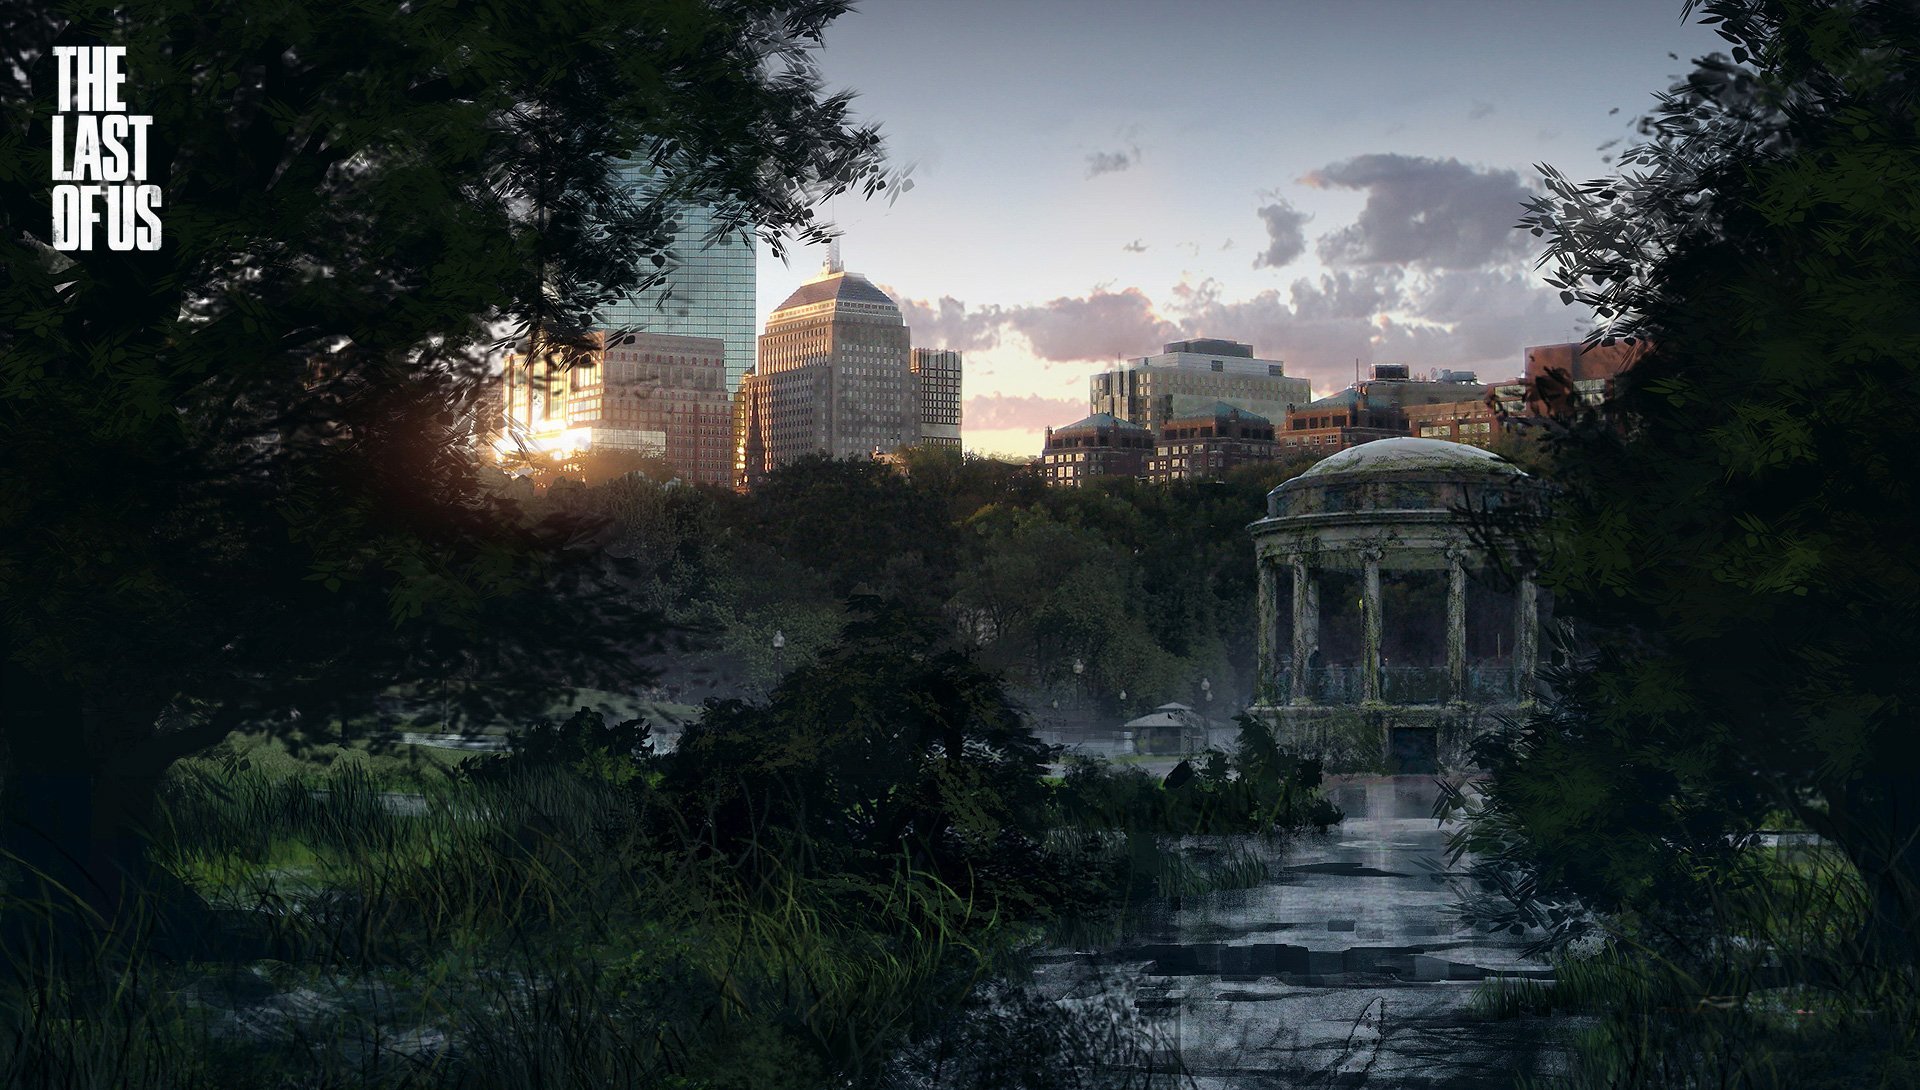 Town of us 3 3 1. The last of us город. The last of us город арт. Постапокалипсис арт the last of us. Заброшенный город the last of us 2.